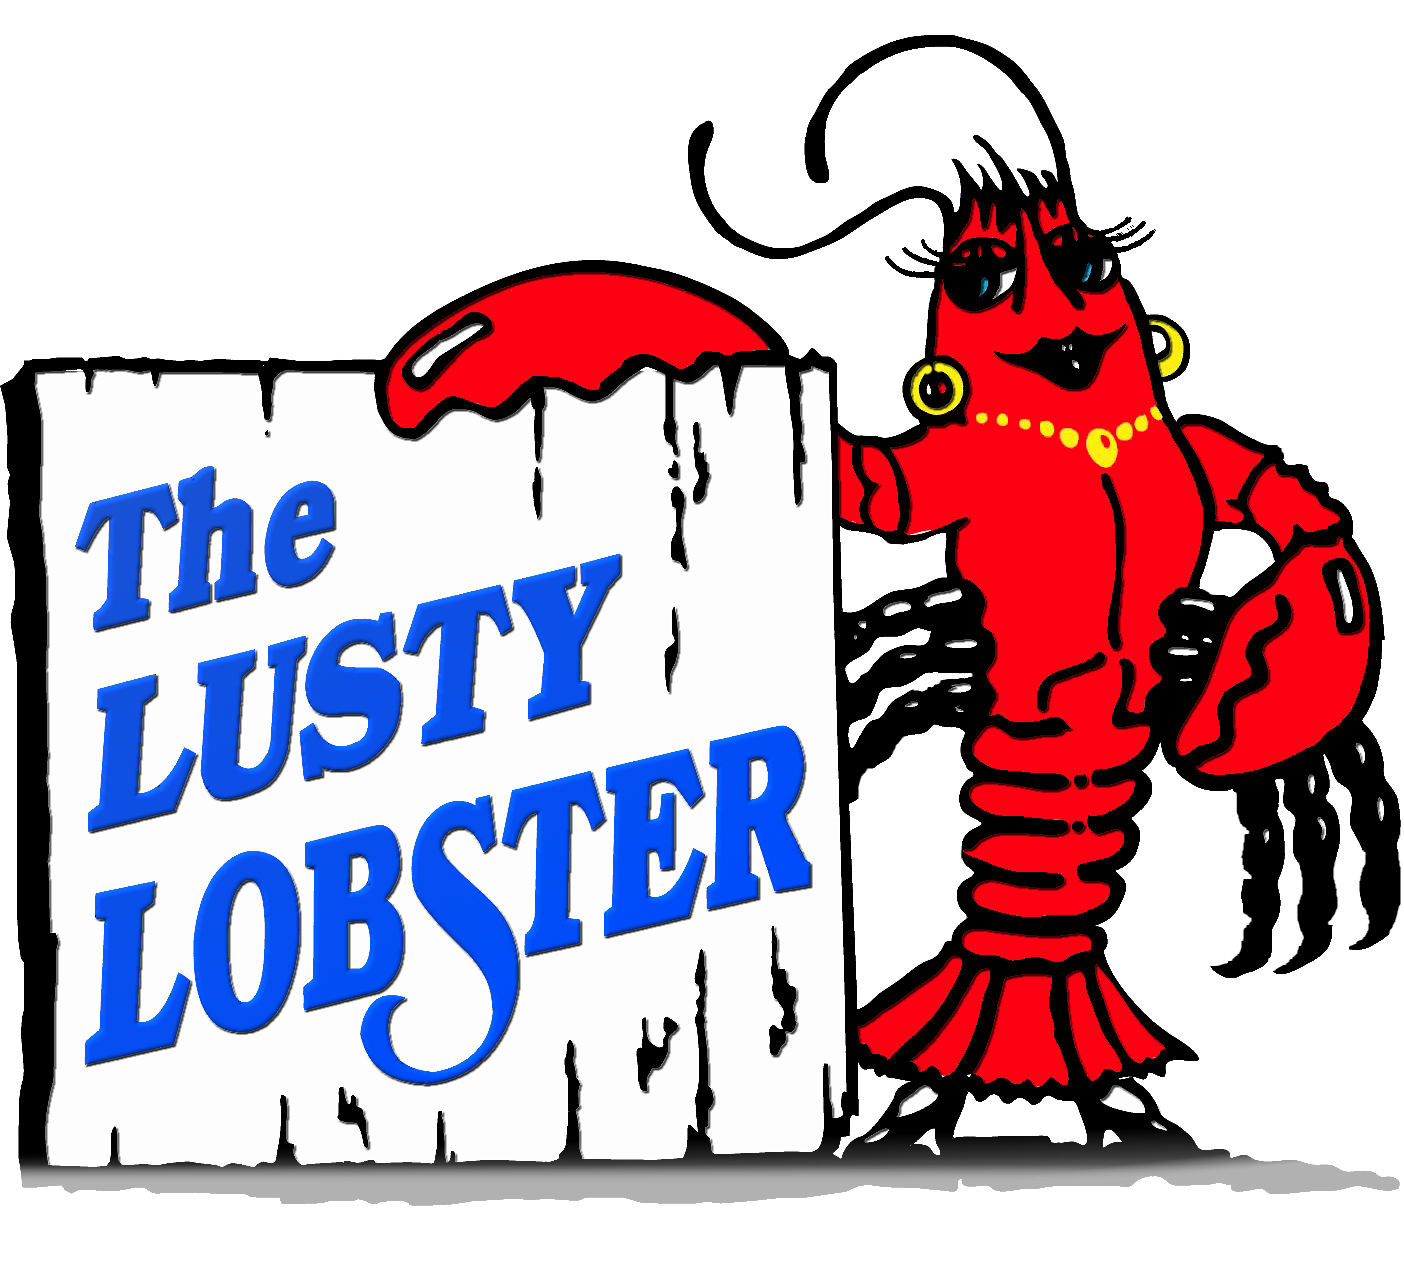 lobster clipart maine lobster